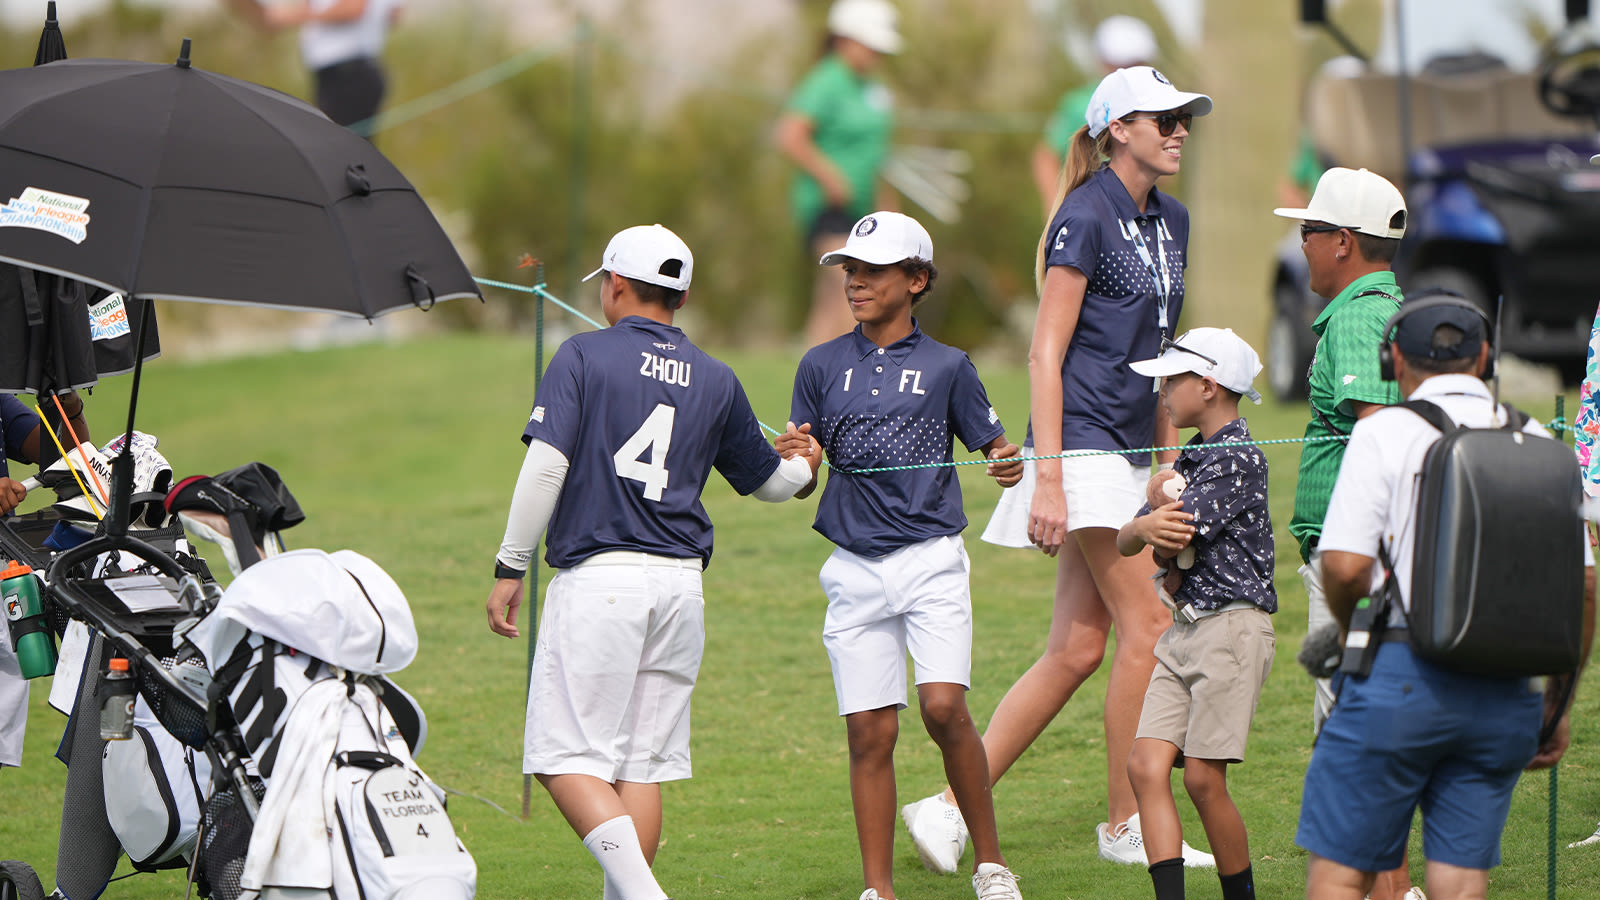 Axel Monssoh of Team Florida cheers on his teammates during the first round of the 2022 National Car Rental PGA Jr. League Championship at Grayhawk Golf Club on October 7, 2022 in Scottsdale, Arizona. (Photo by Darren Carroll/PGA of America)